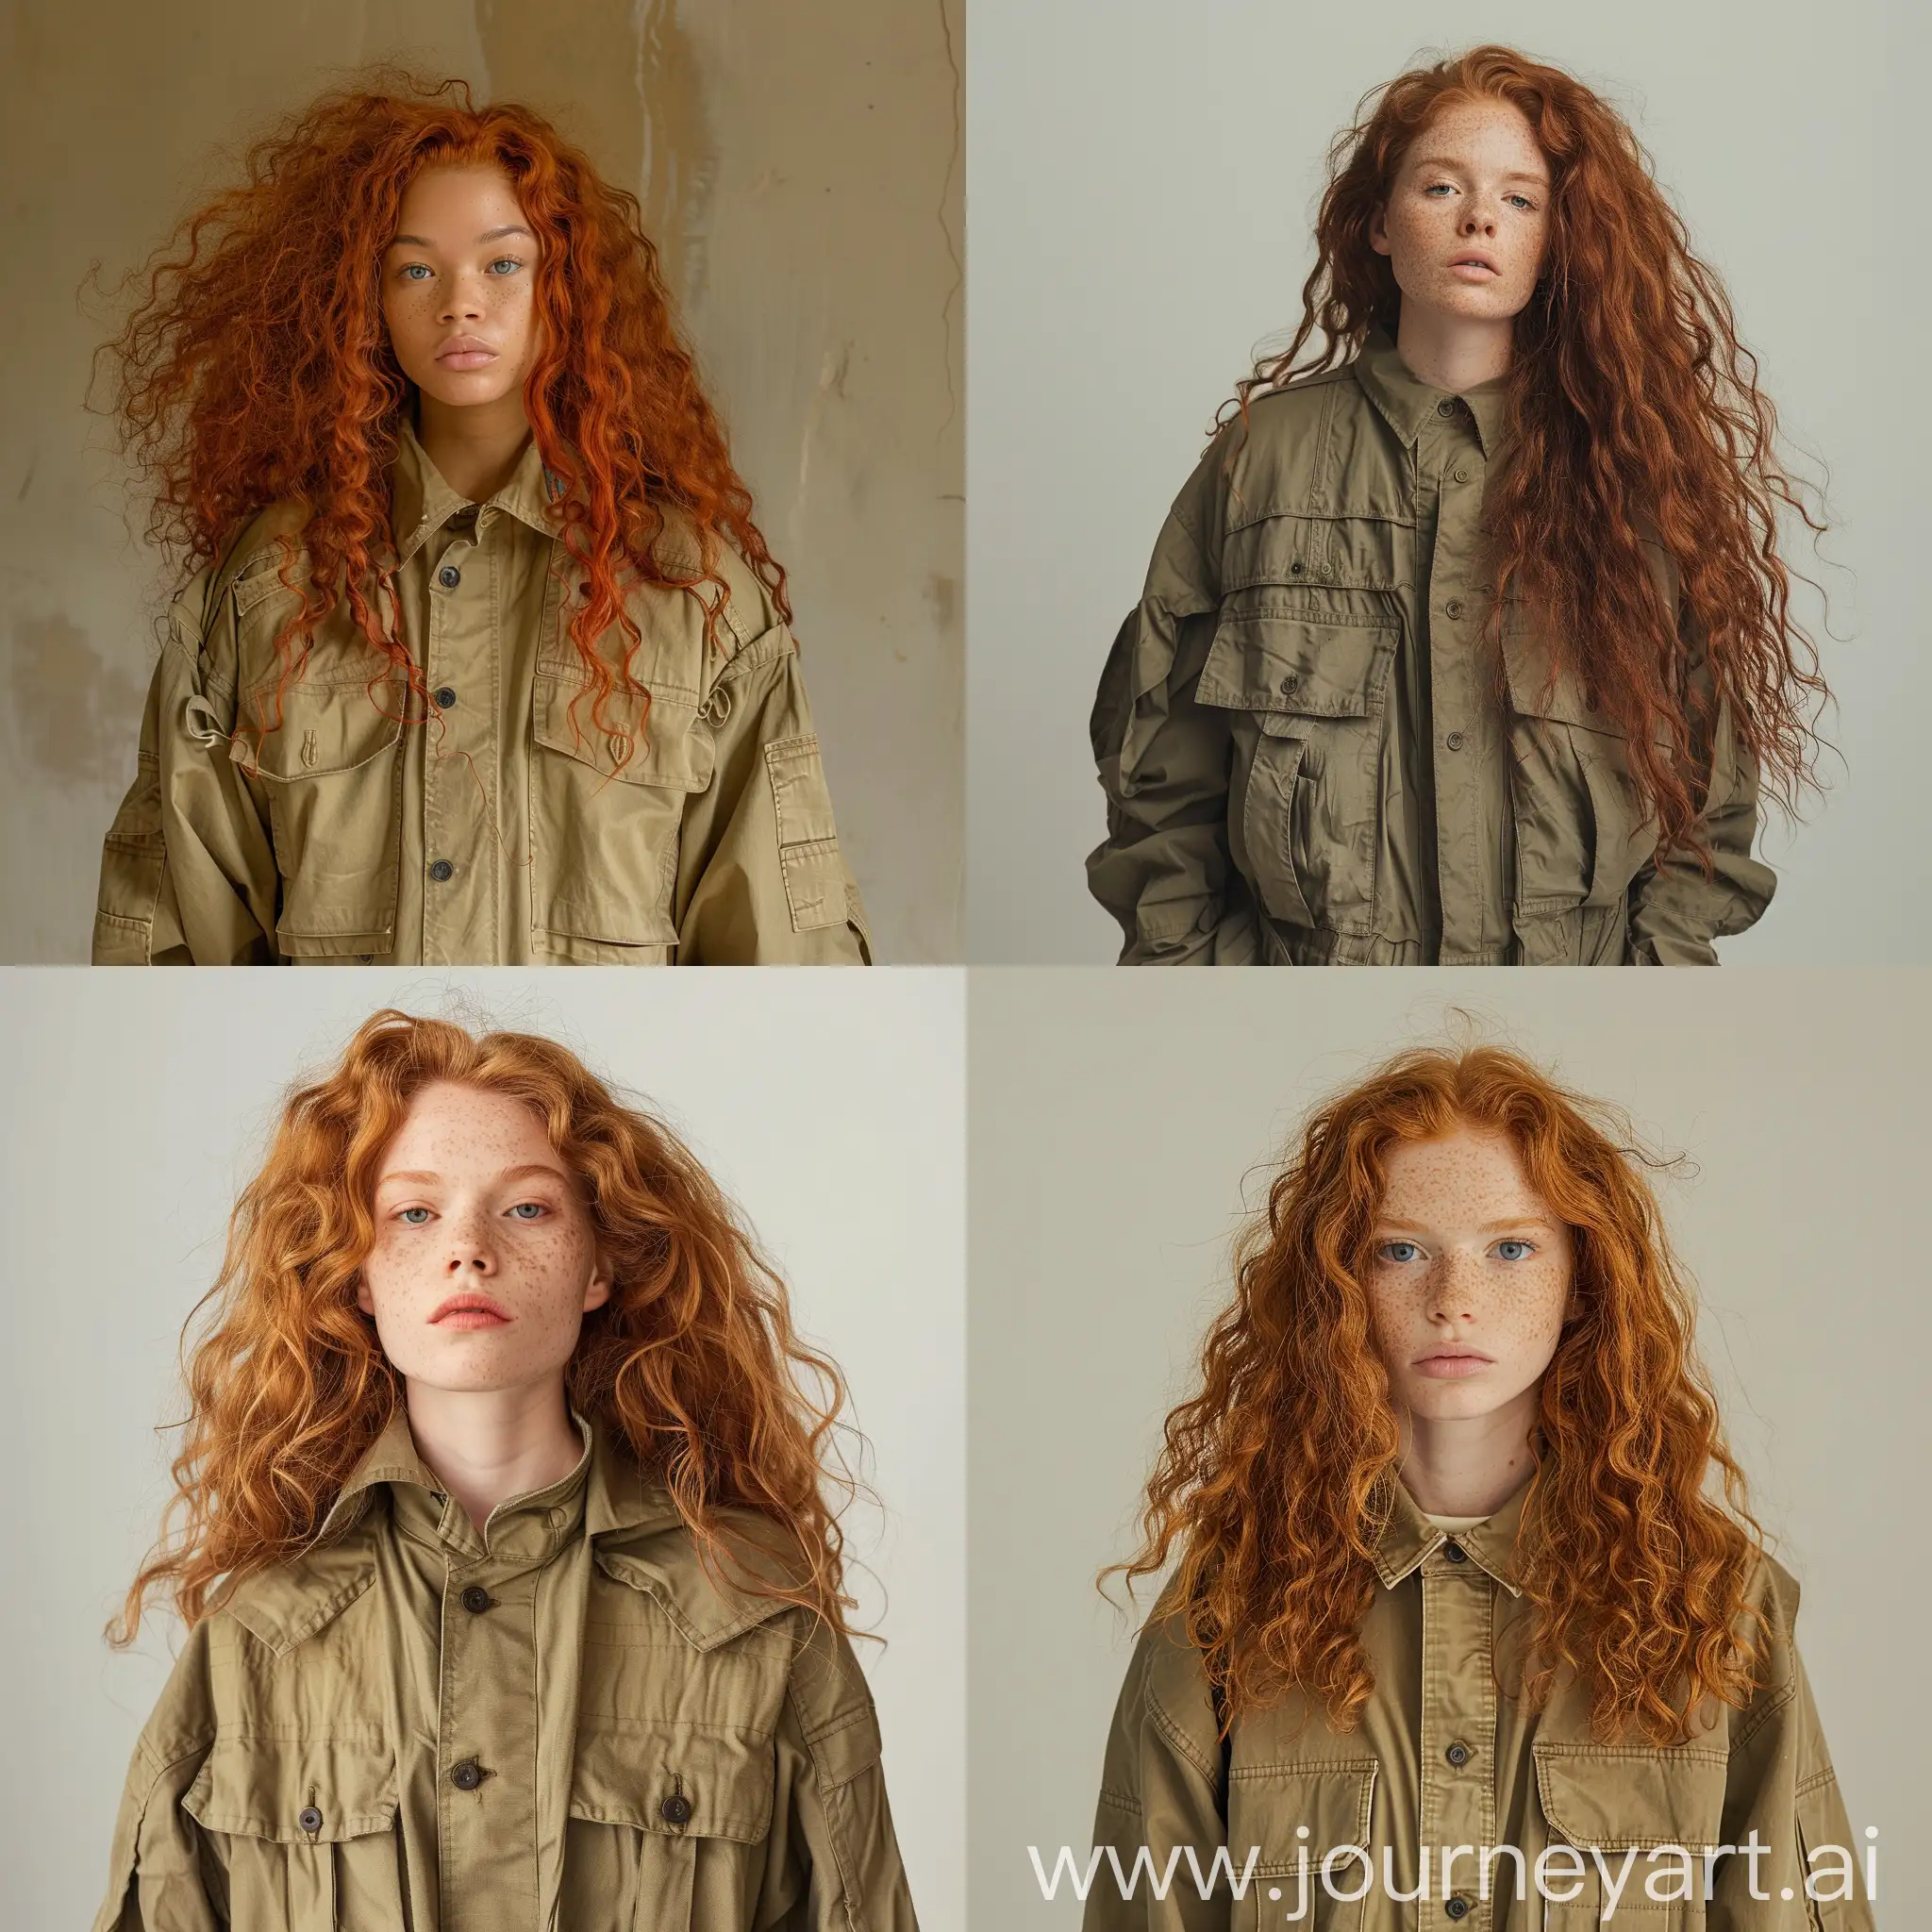 light skin woman in baggy masculine outift with medidum long curly red hair